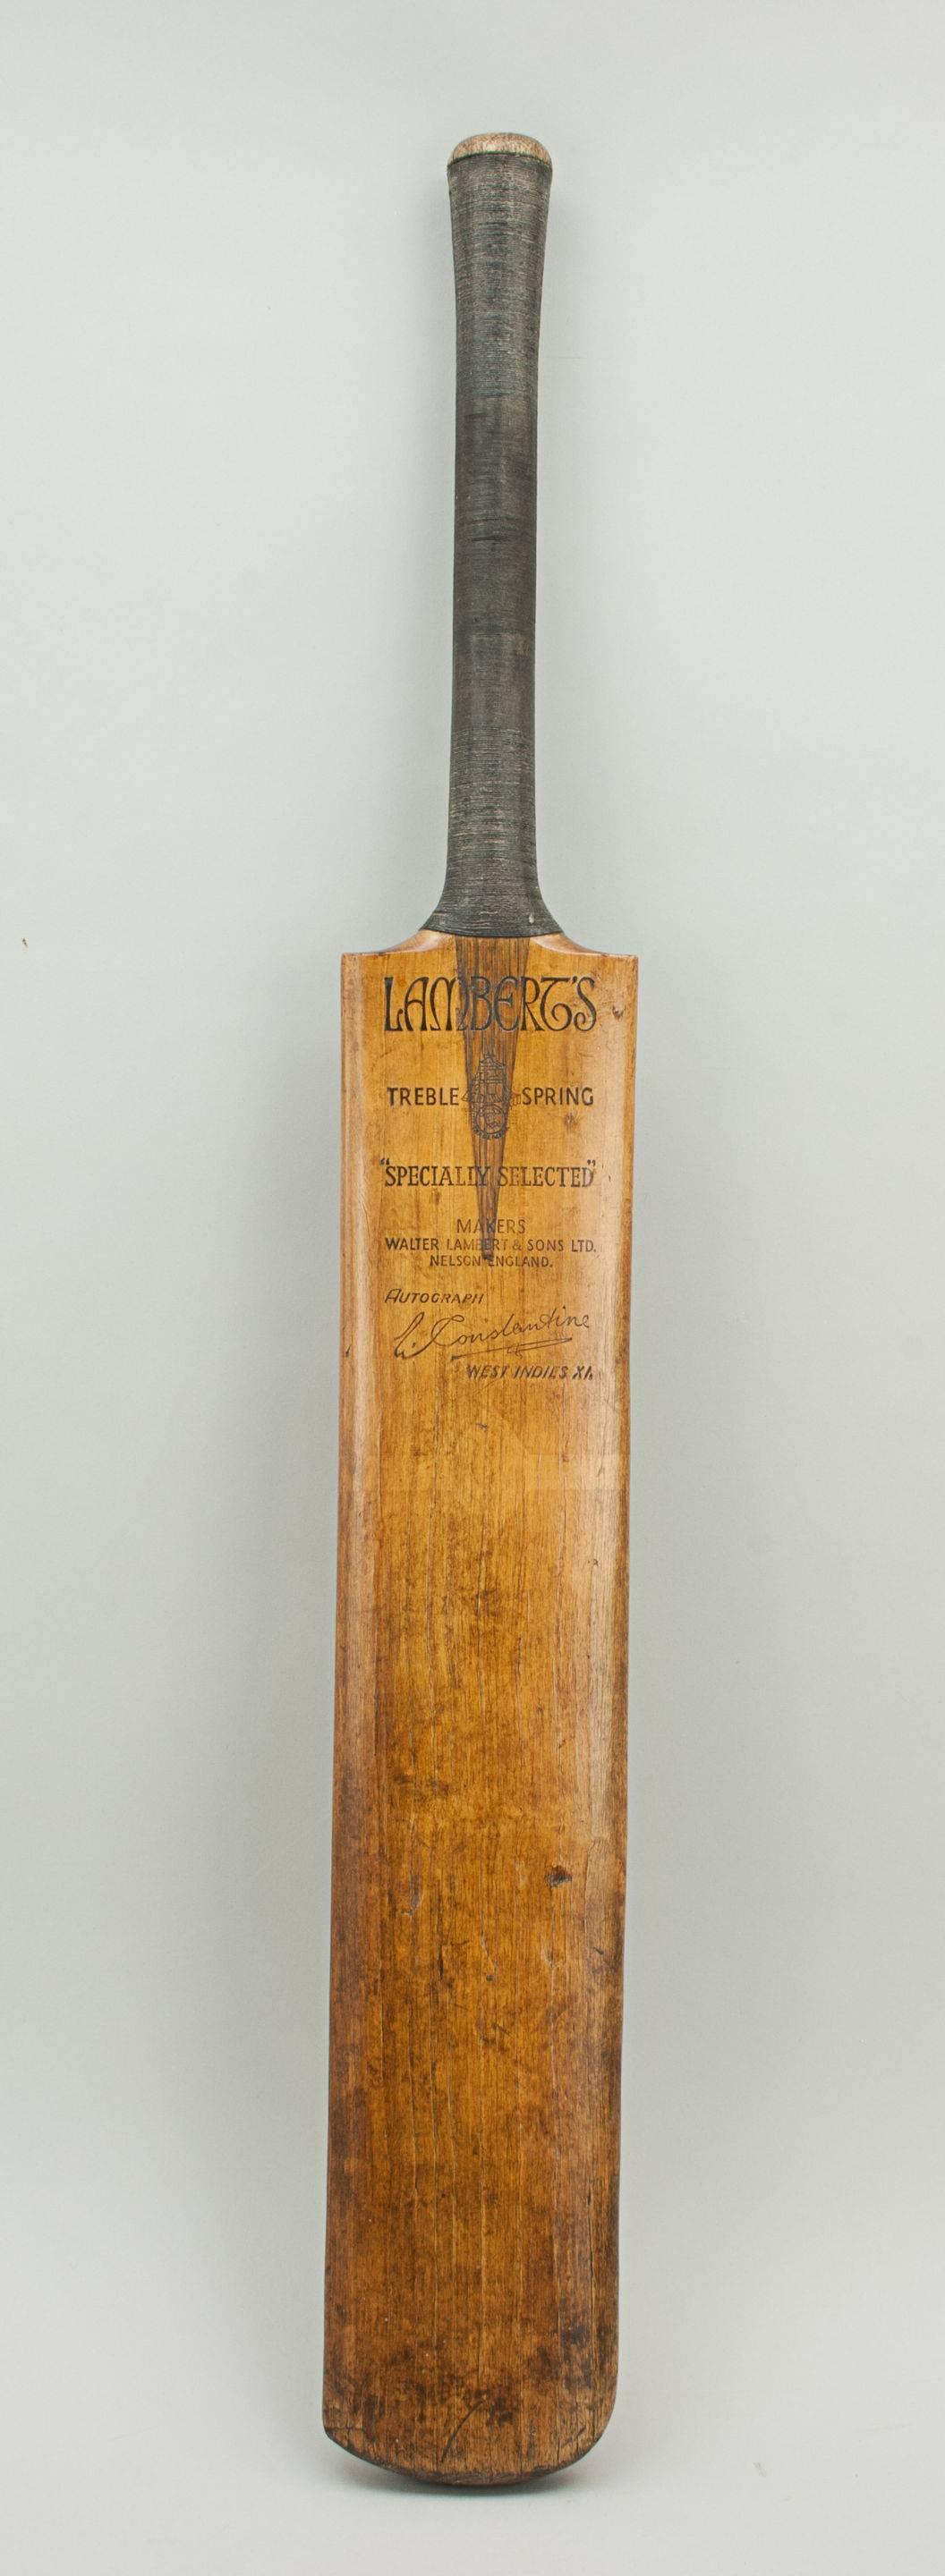 Vintage Lambert's cricket bat.
A willow cricket bat with good color and strung grip made by Walter Lambert & Sons. The blade is embossed 'Lambert's, Treble Spring, 'Specially Selected', Makers Walter Lambert & Sons Ltd., Nelson England'. It